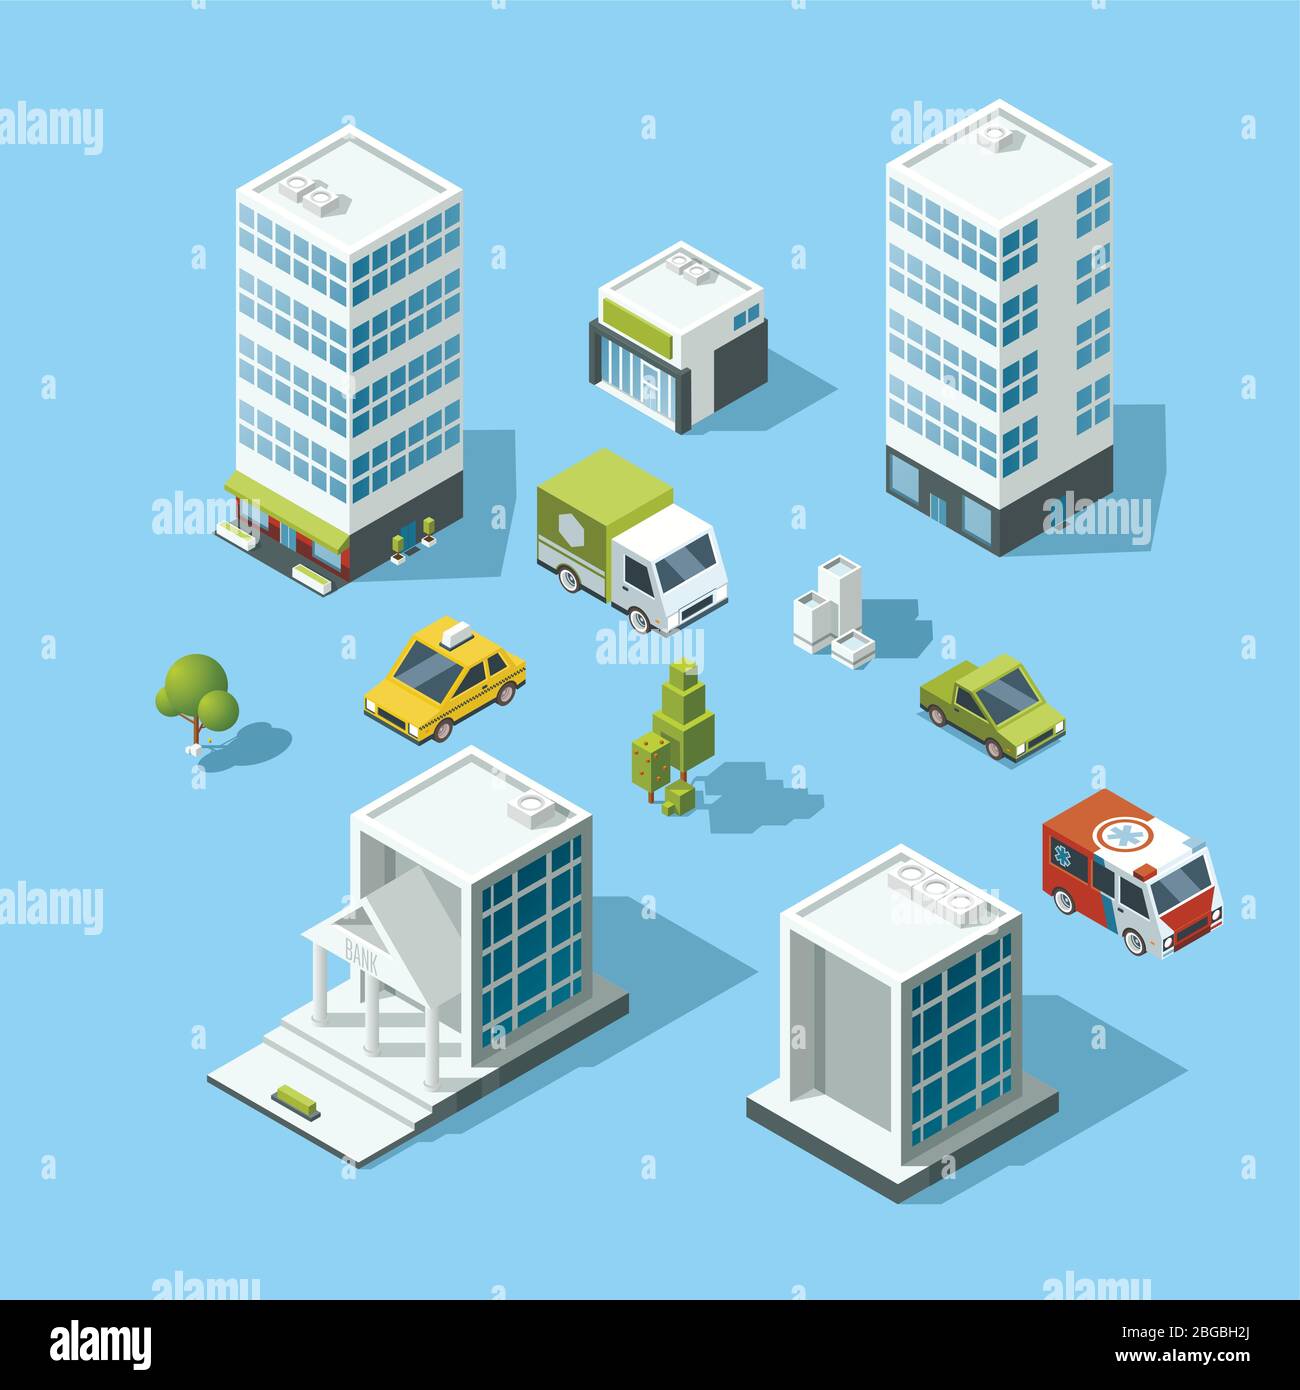 Set of isometric cartoon-style buildings, trees and cars. Architecture template illustration Stock Vector